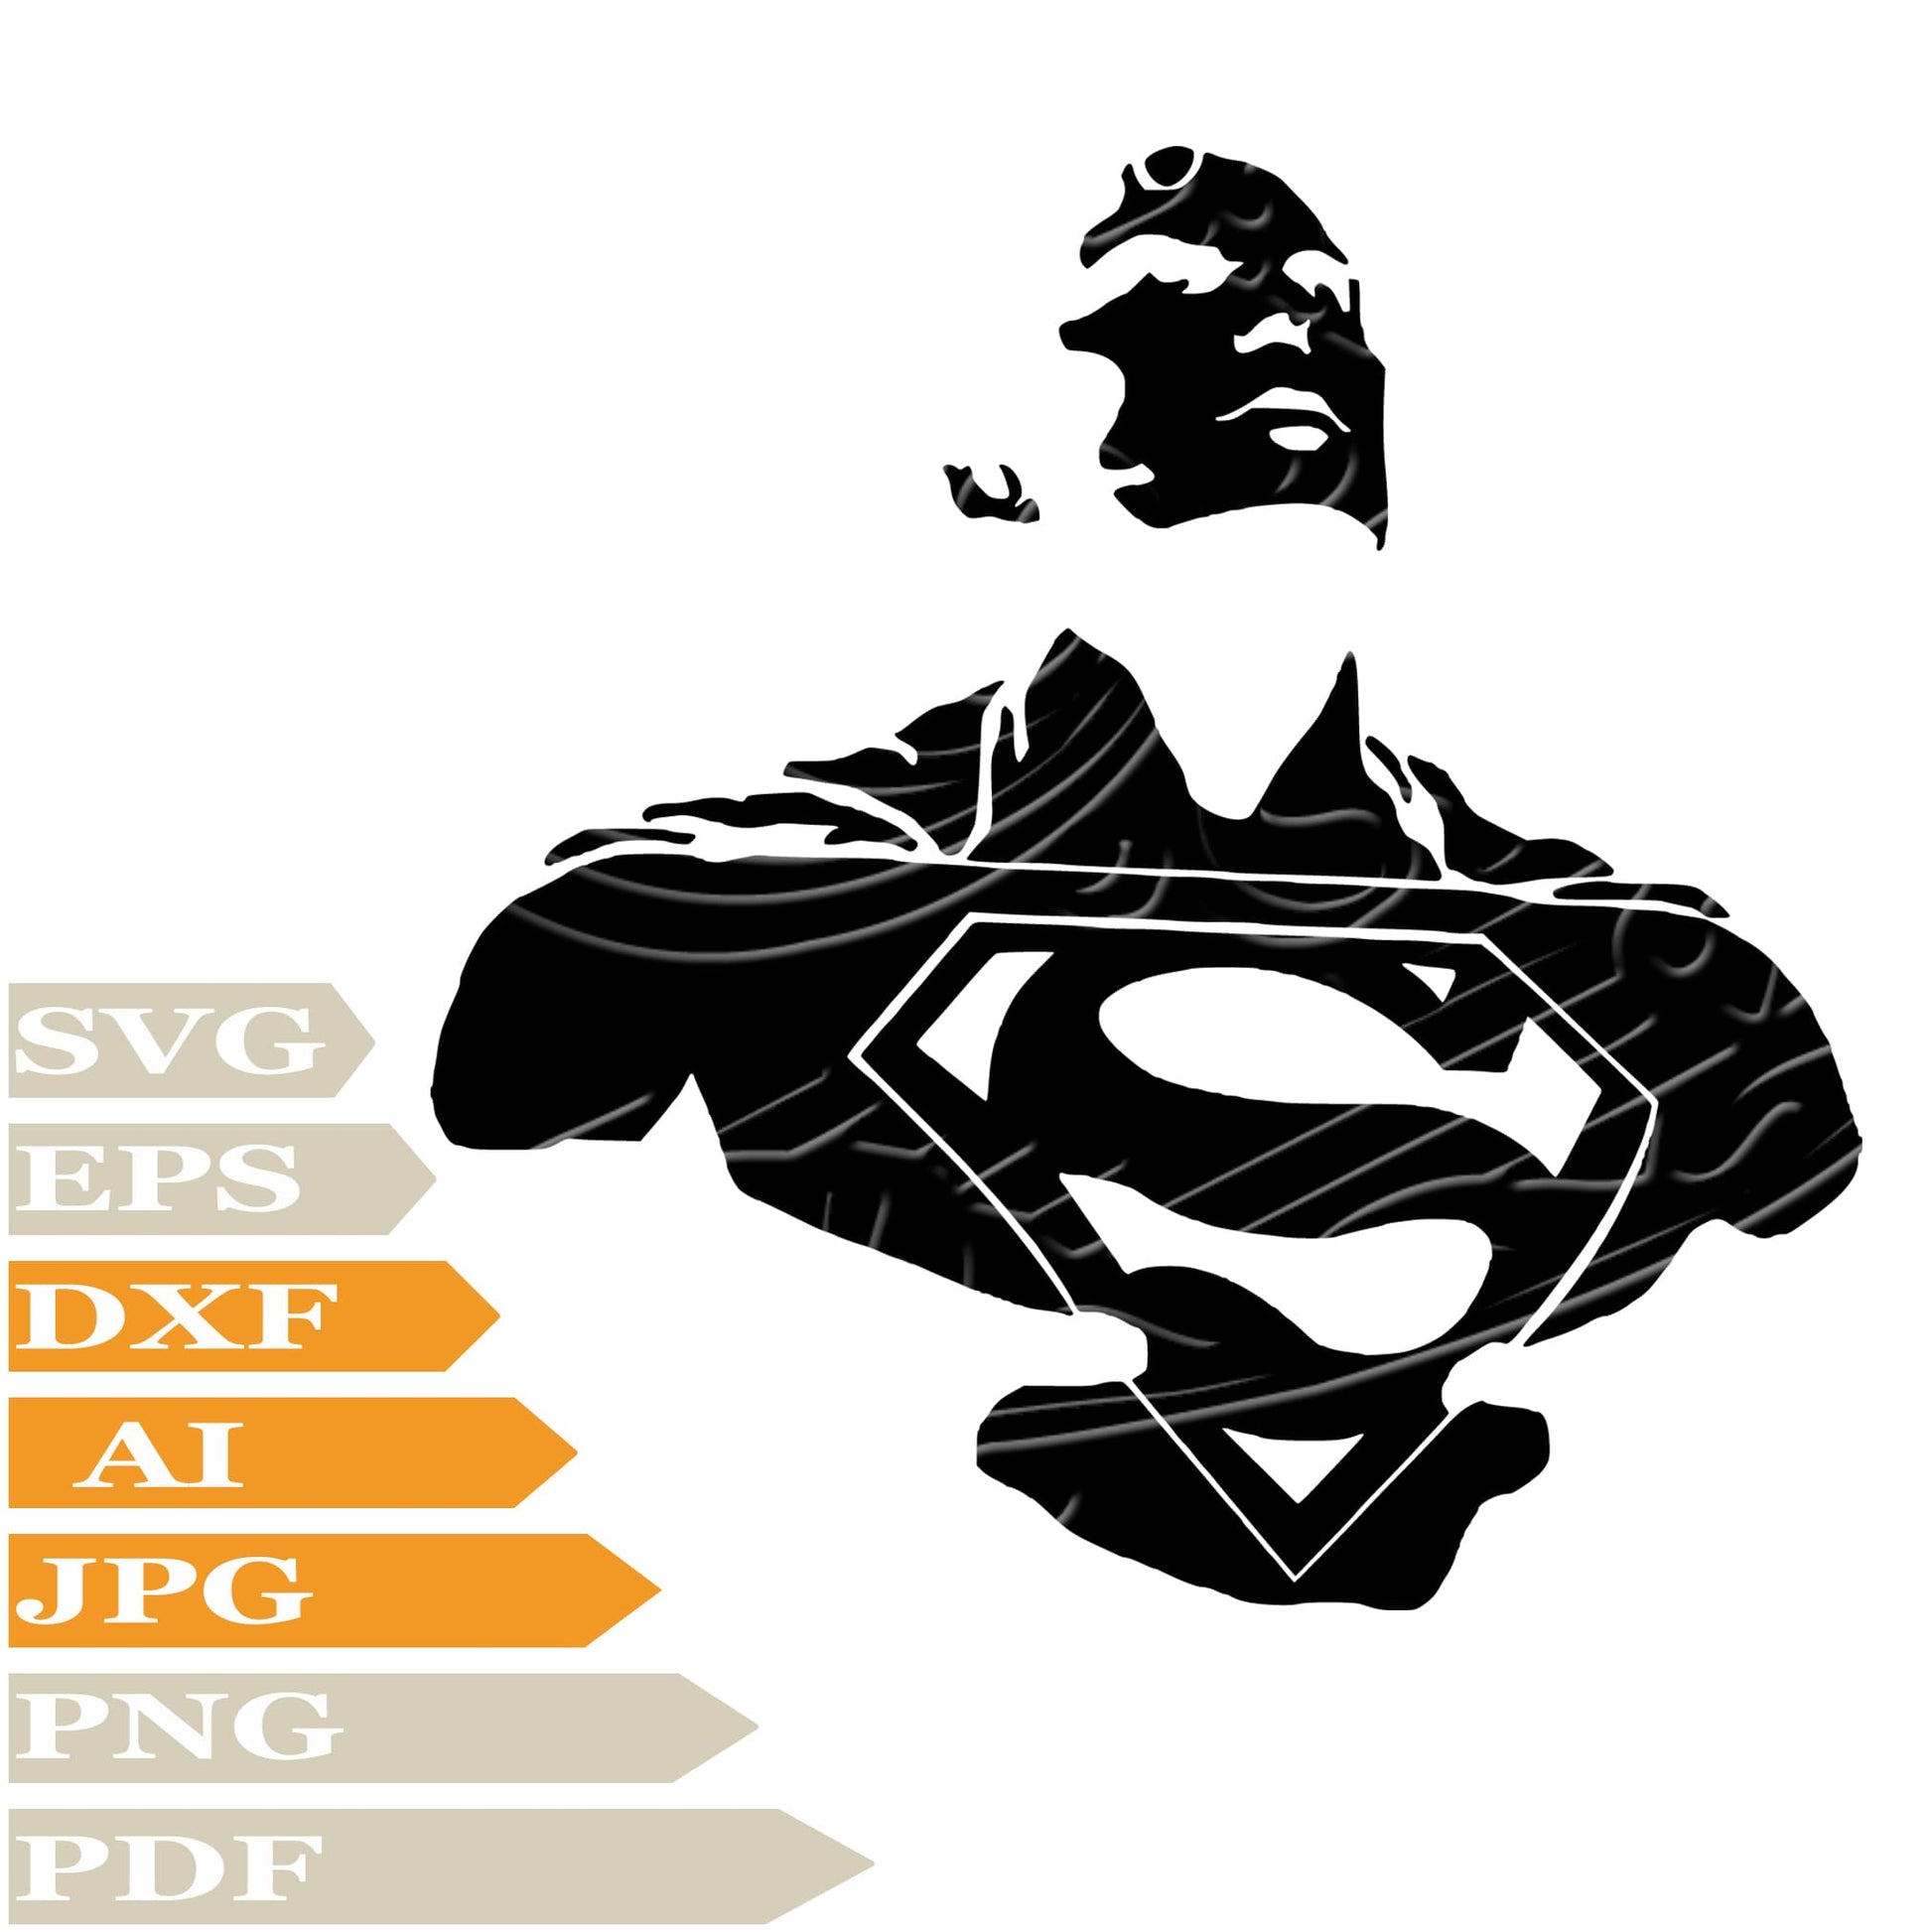 Superman, Super Man Svg File, Image Cut, Png, For Tattoo, Silhouette, Digital Vector Download, Cut File, Clipart, For Cricut